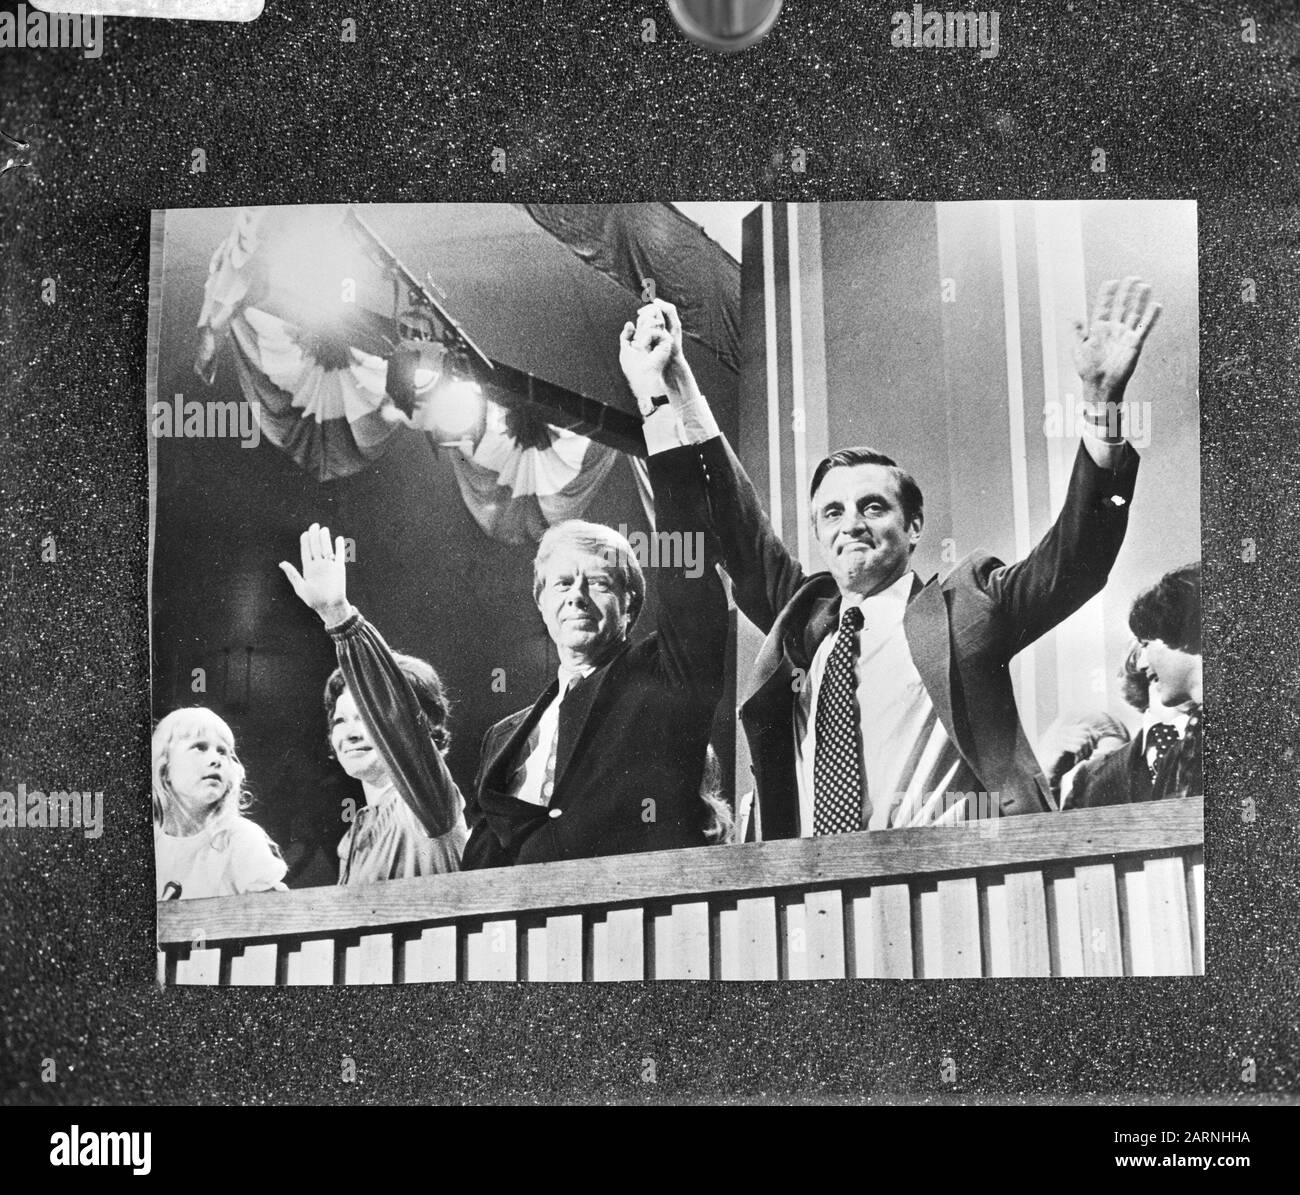 Election campaigns started in United States, democratic candidate Jimmy Carter and right Mondale (candidate vice president) Date: September 8, 1976 Location: America Keywords: Politics Personal name: Jimmy Carter Stock Photo